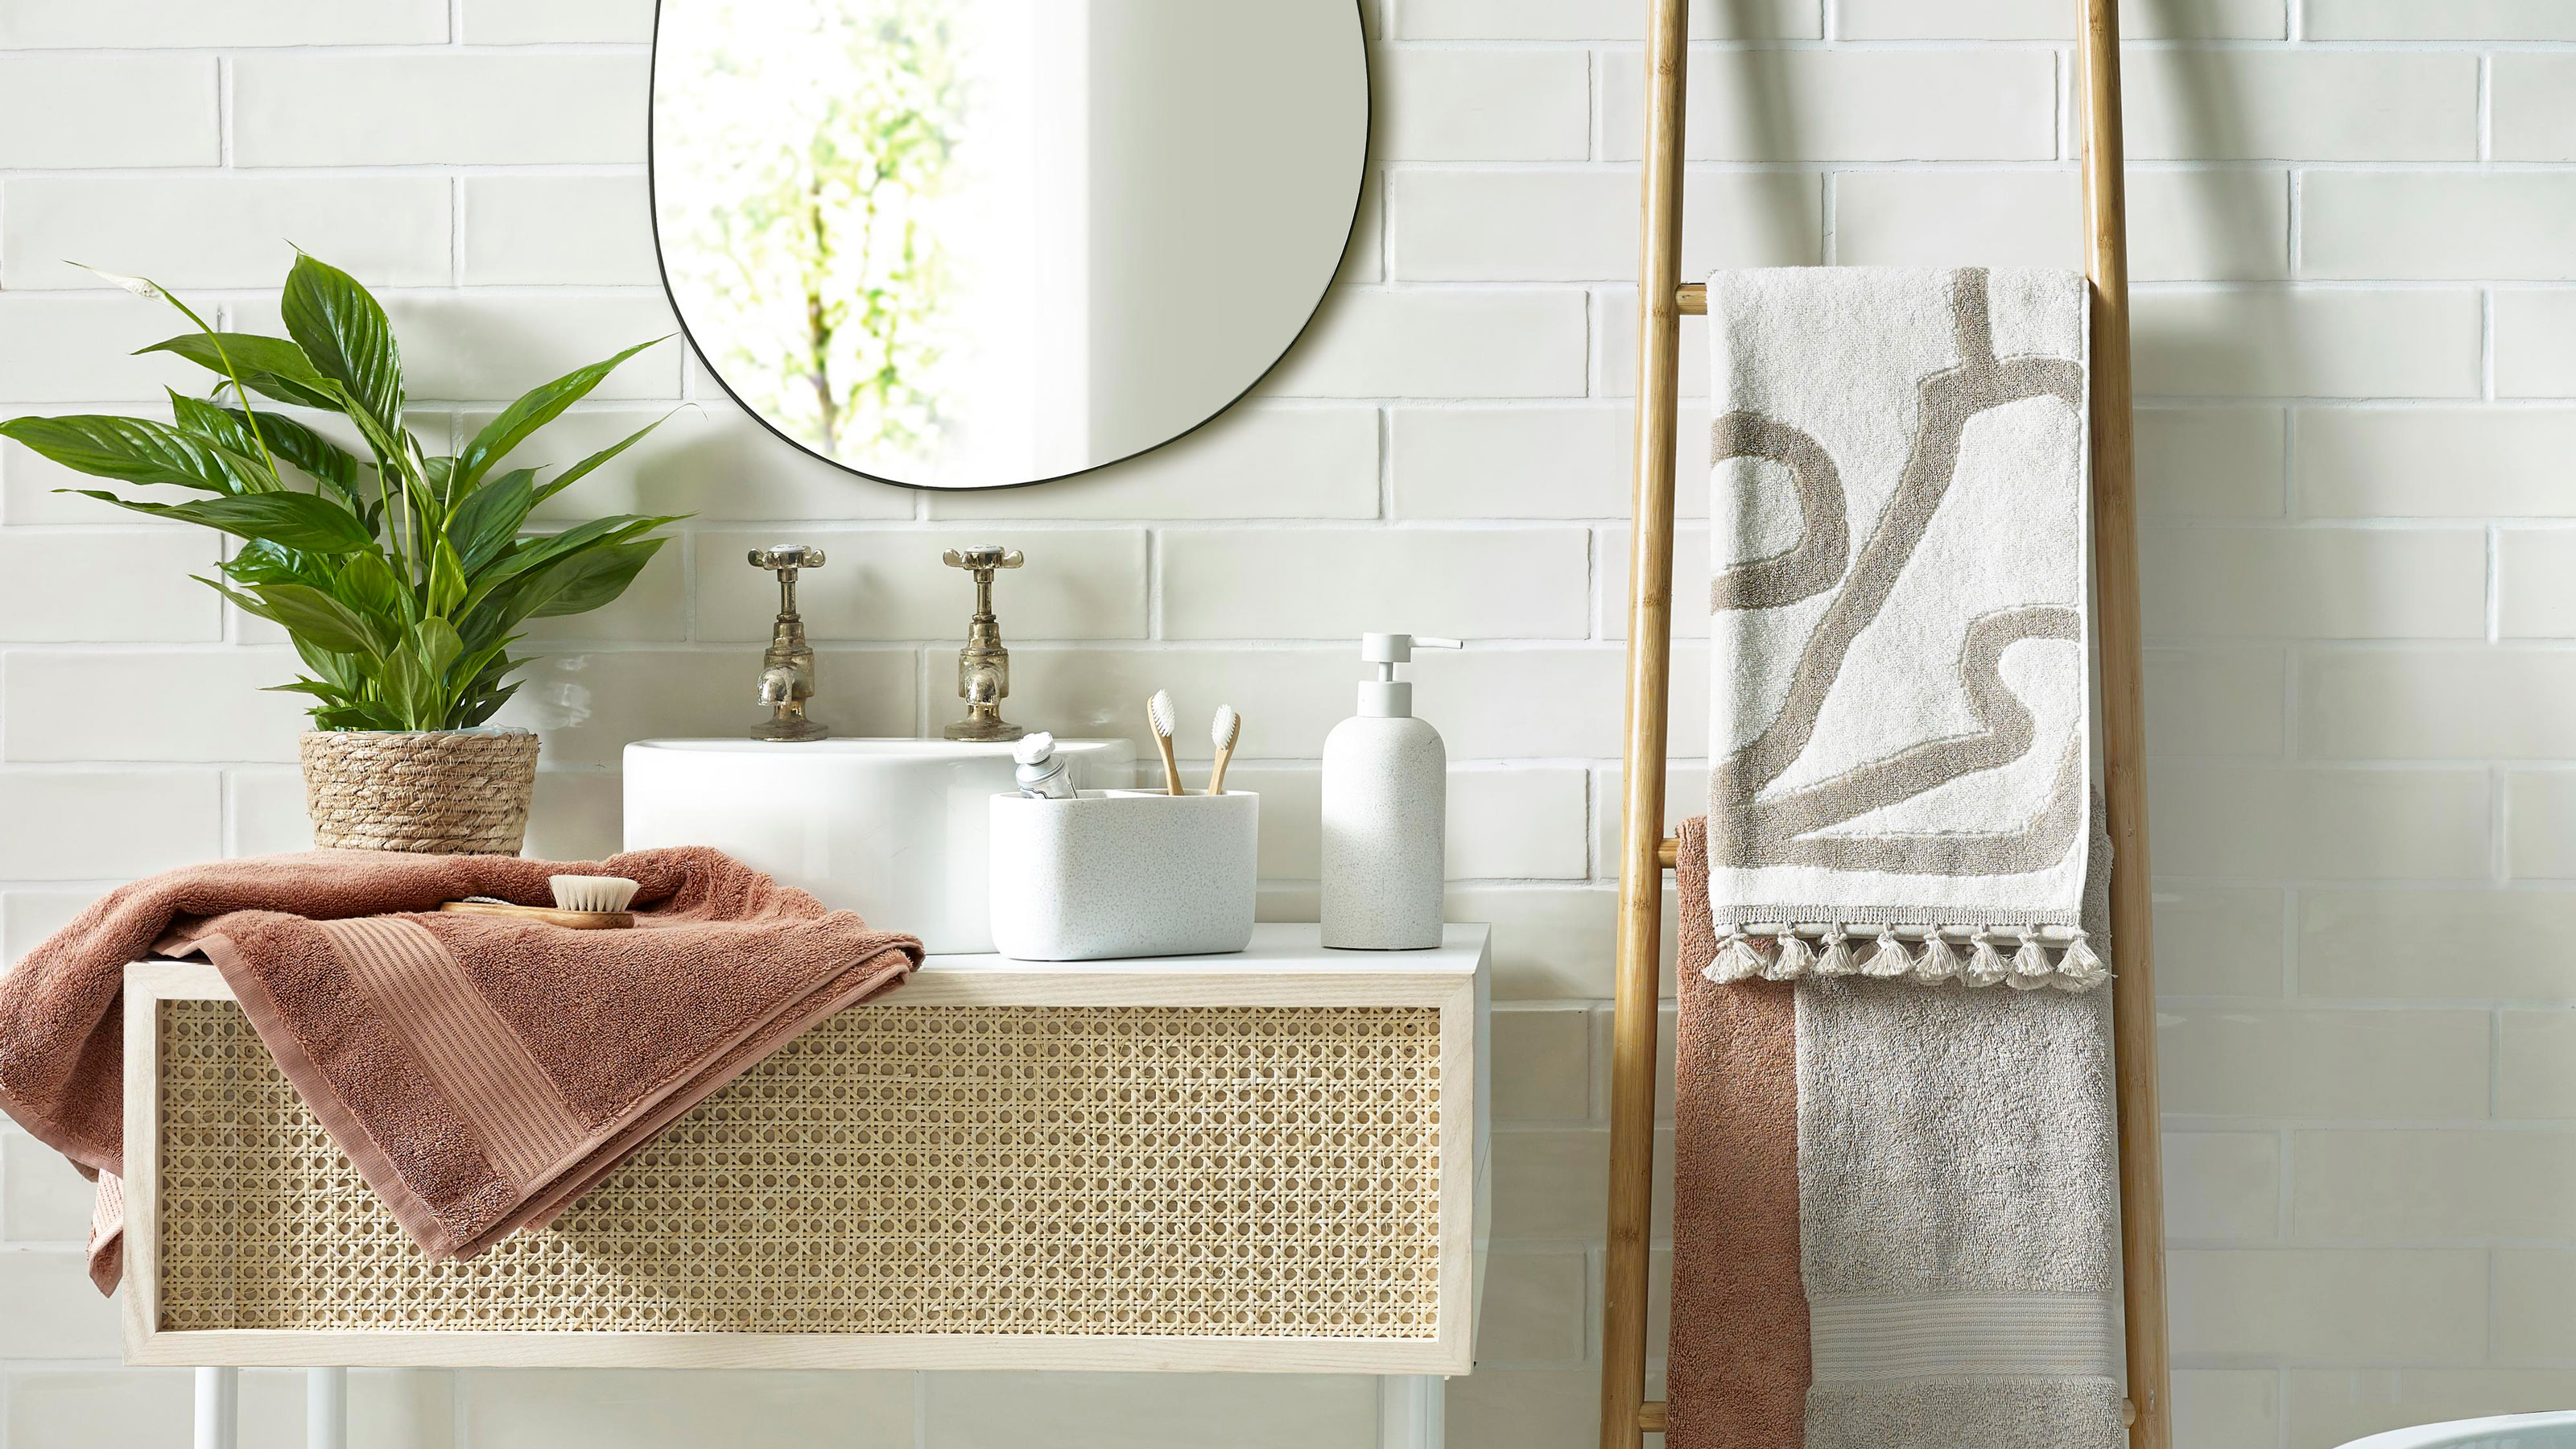 18 bathroom ideas for every space, style and budget   Real Homes